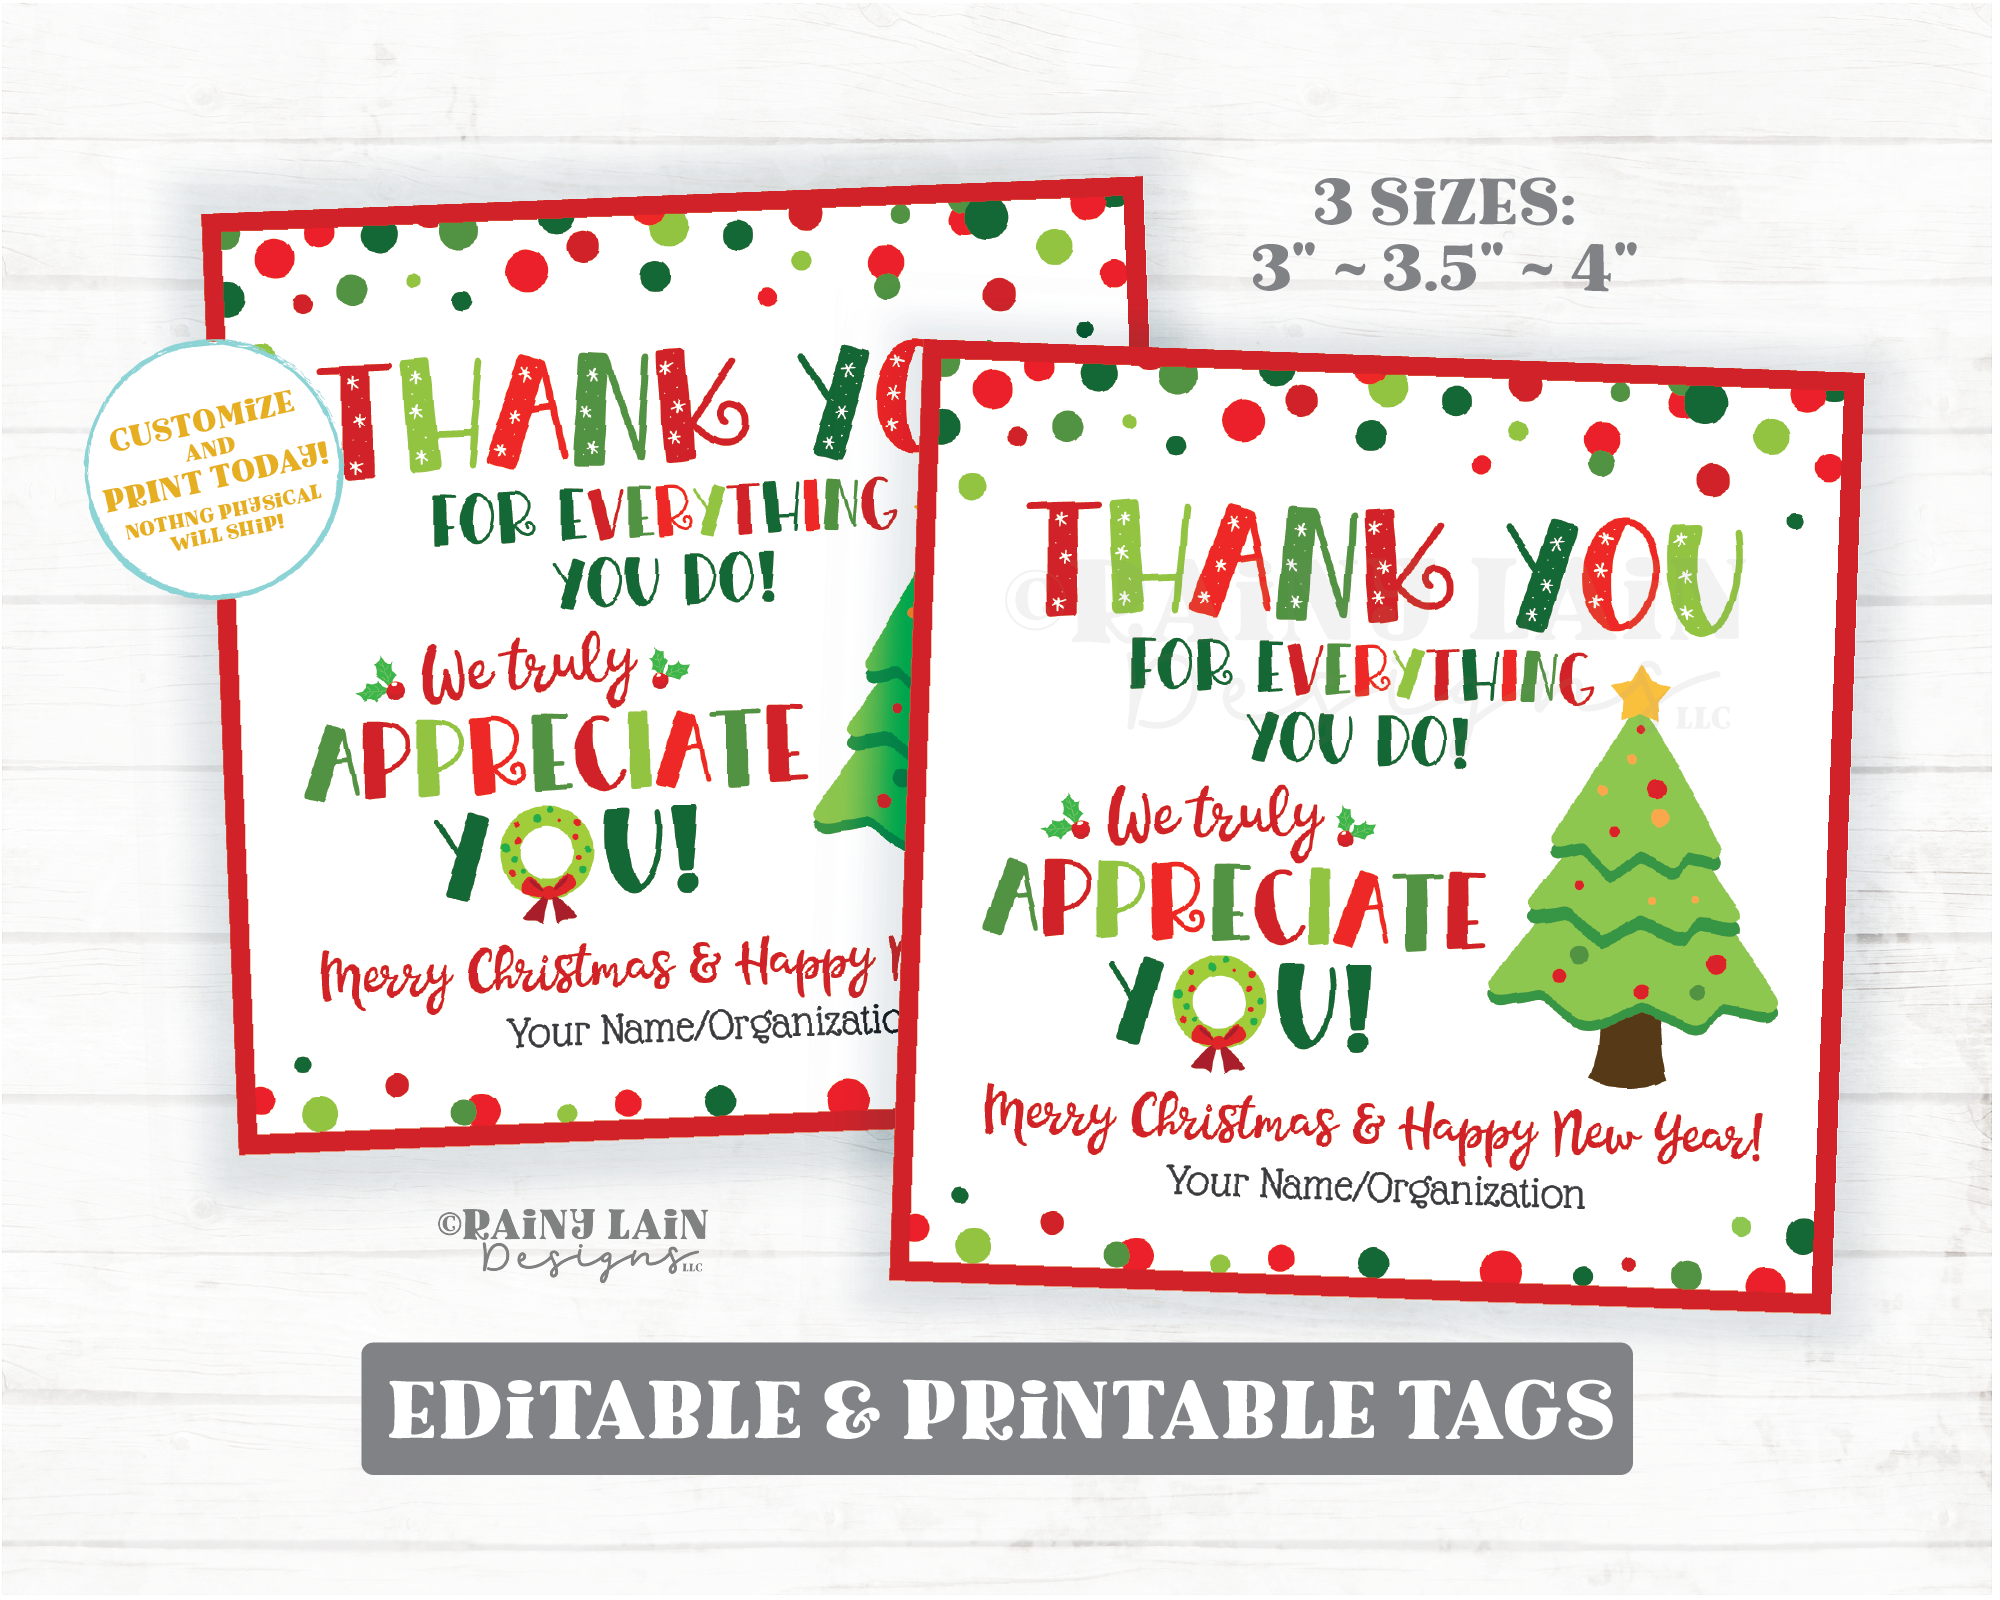 Thank you for all you do Christmas tag Appreciate Holiday Gift Tags Appreciation Favor Tags Teacher Staff Employee Company School Square